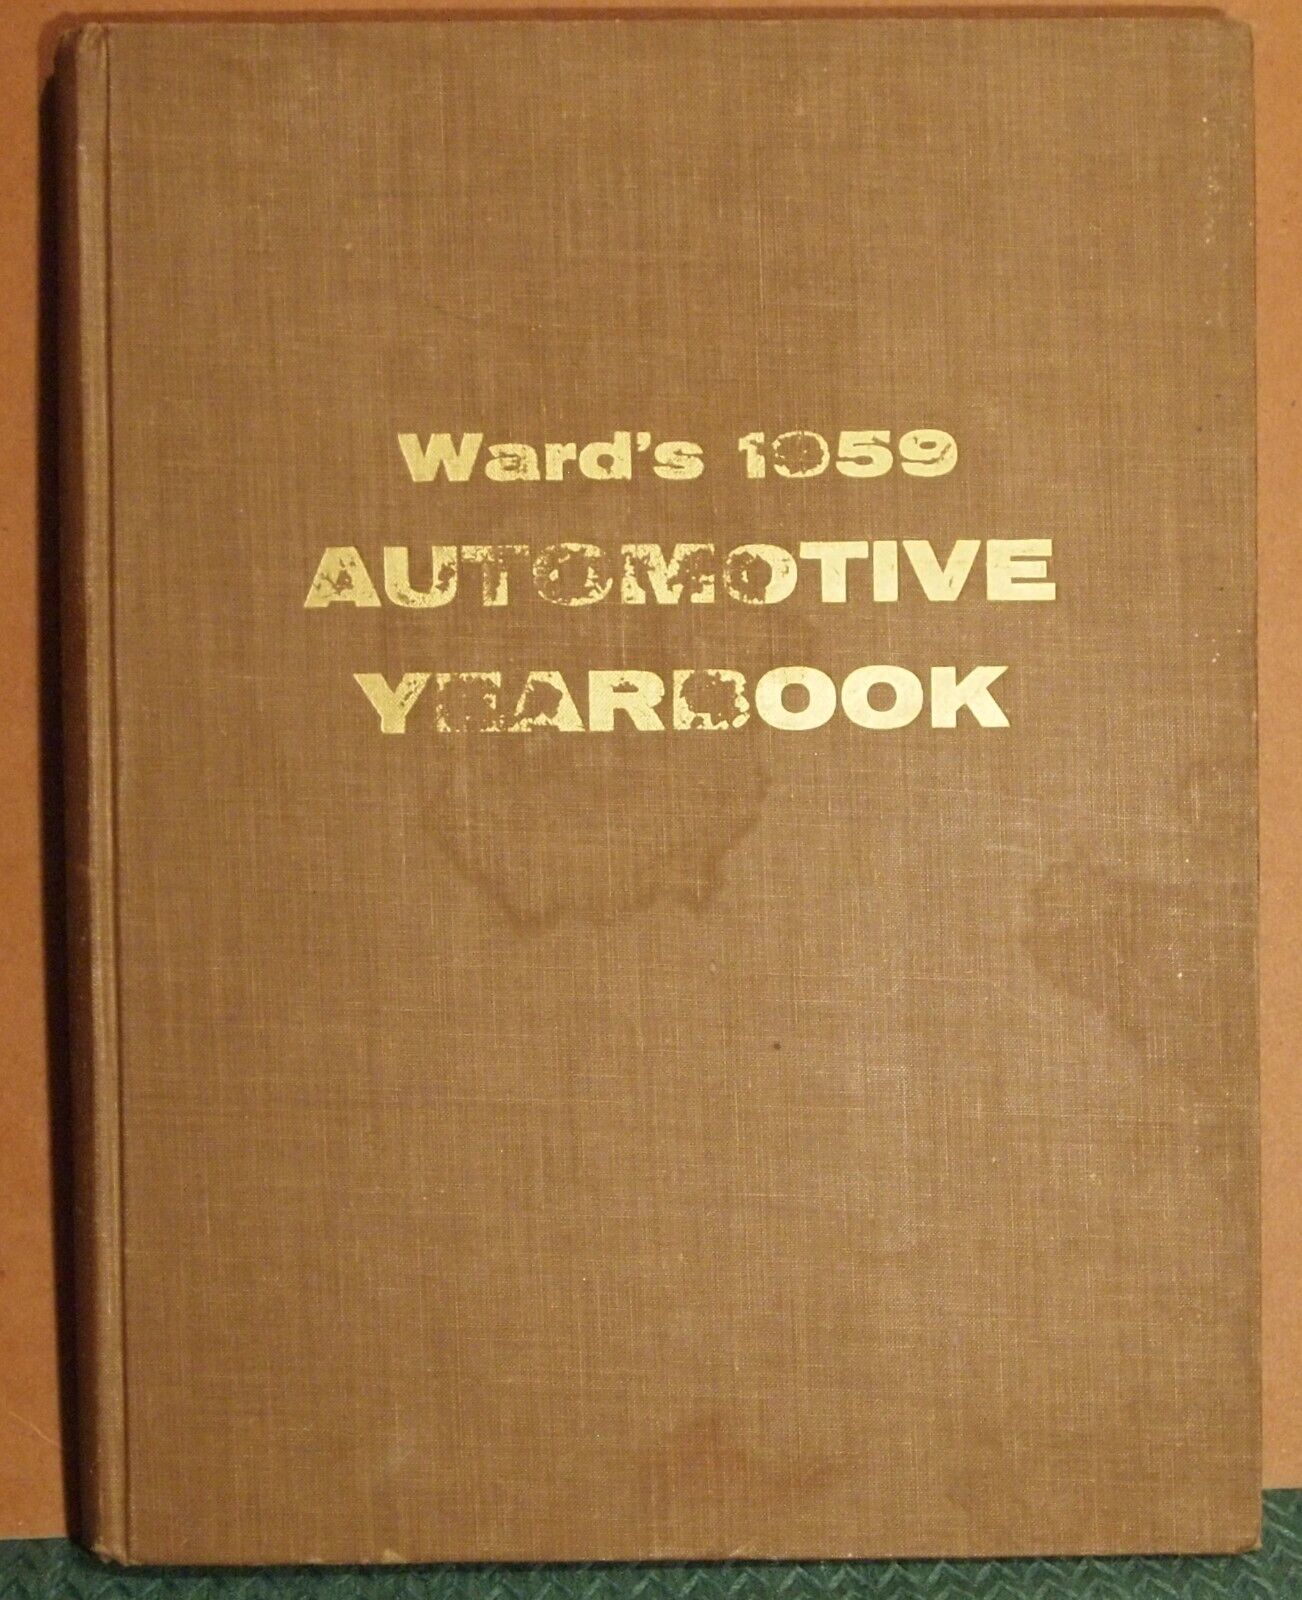 1959 WARD'S AUTOMOTIVE YEARBOOK 21st edition WARDS-03